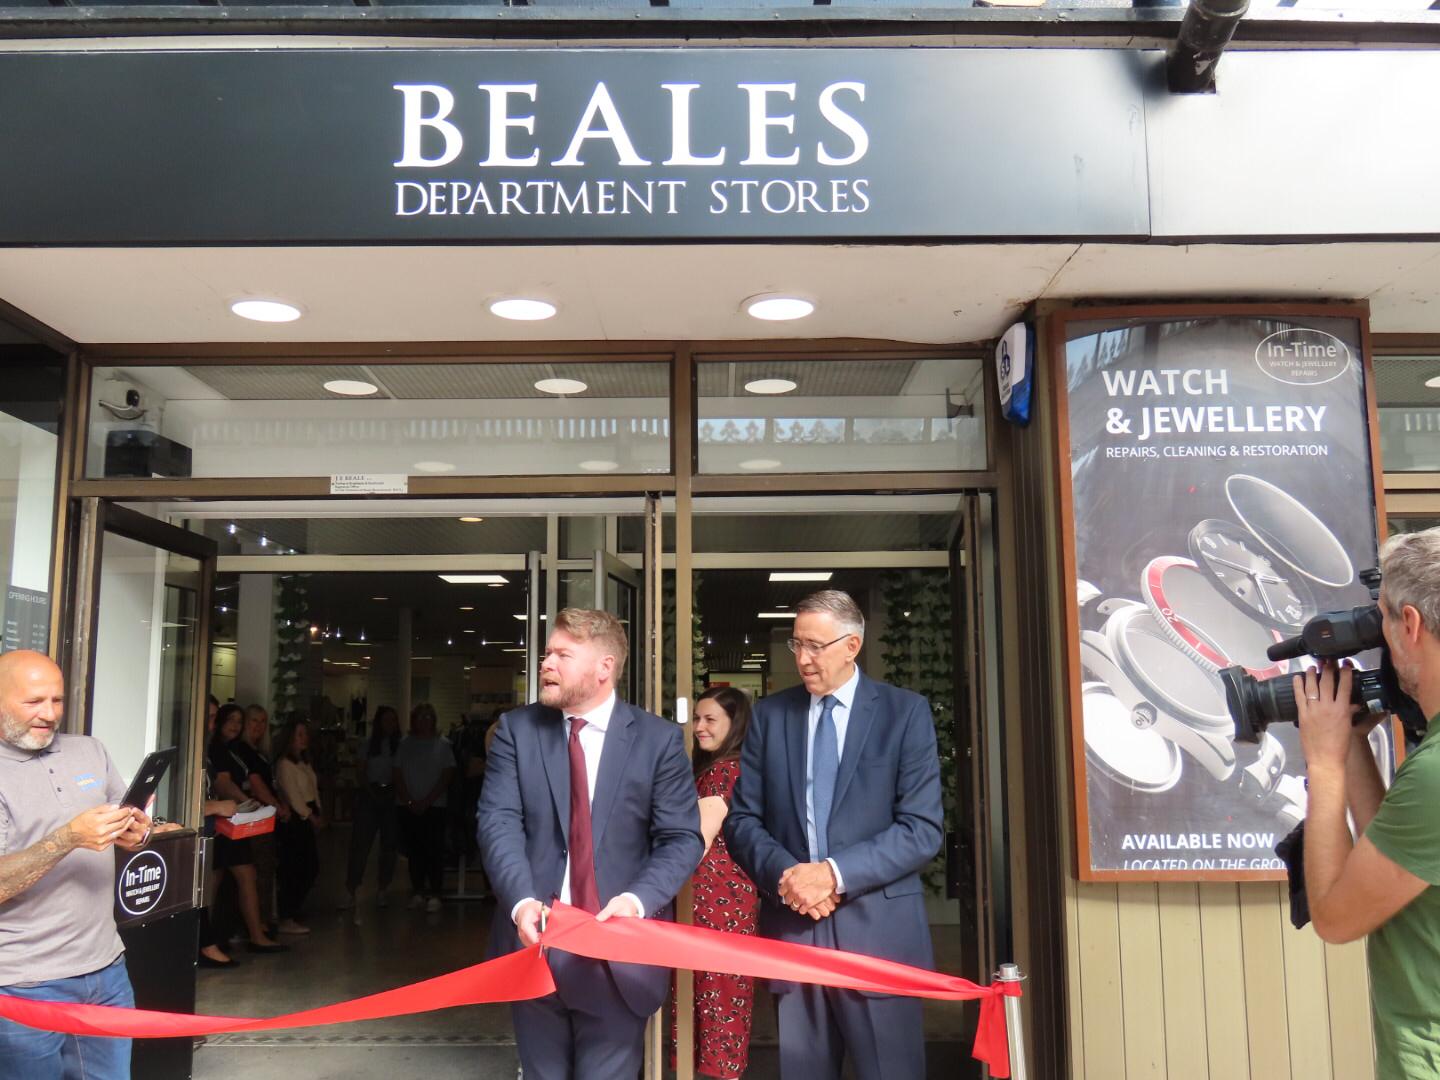 Beales CEO Tony Brown (right) and Southport MP Damien Moore (left) at the officiall opening of the new Beales department store in Southport on Thursday, 12th August. Photo by Andrew Brown Media